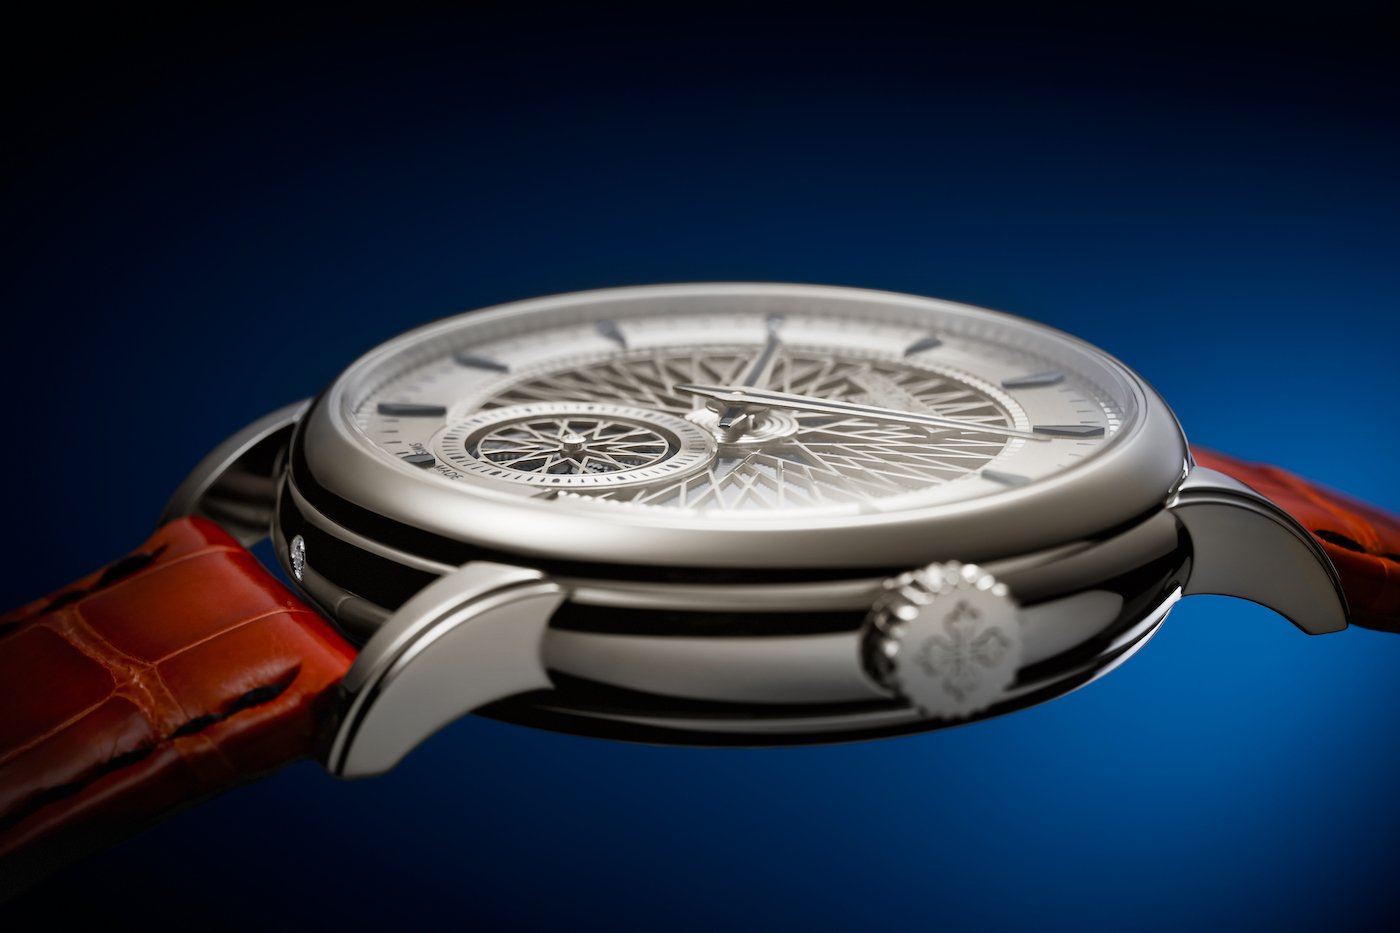 Patek Philippe “Advanced Research”: a breakthrough in chiming watches